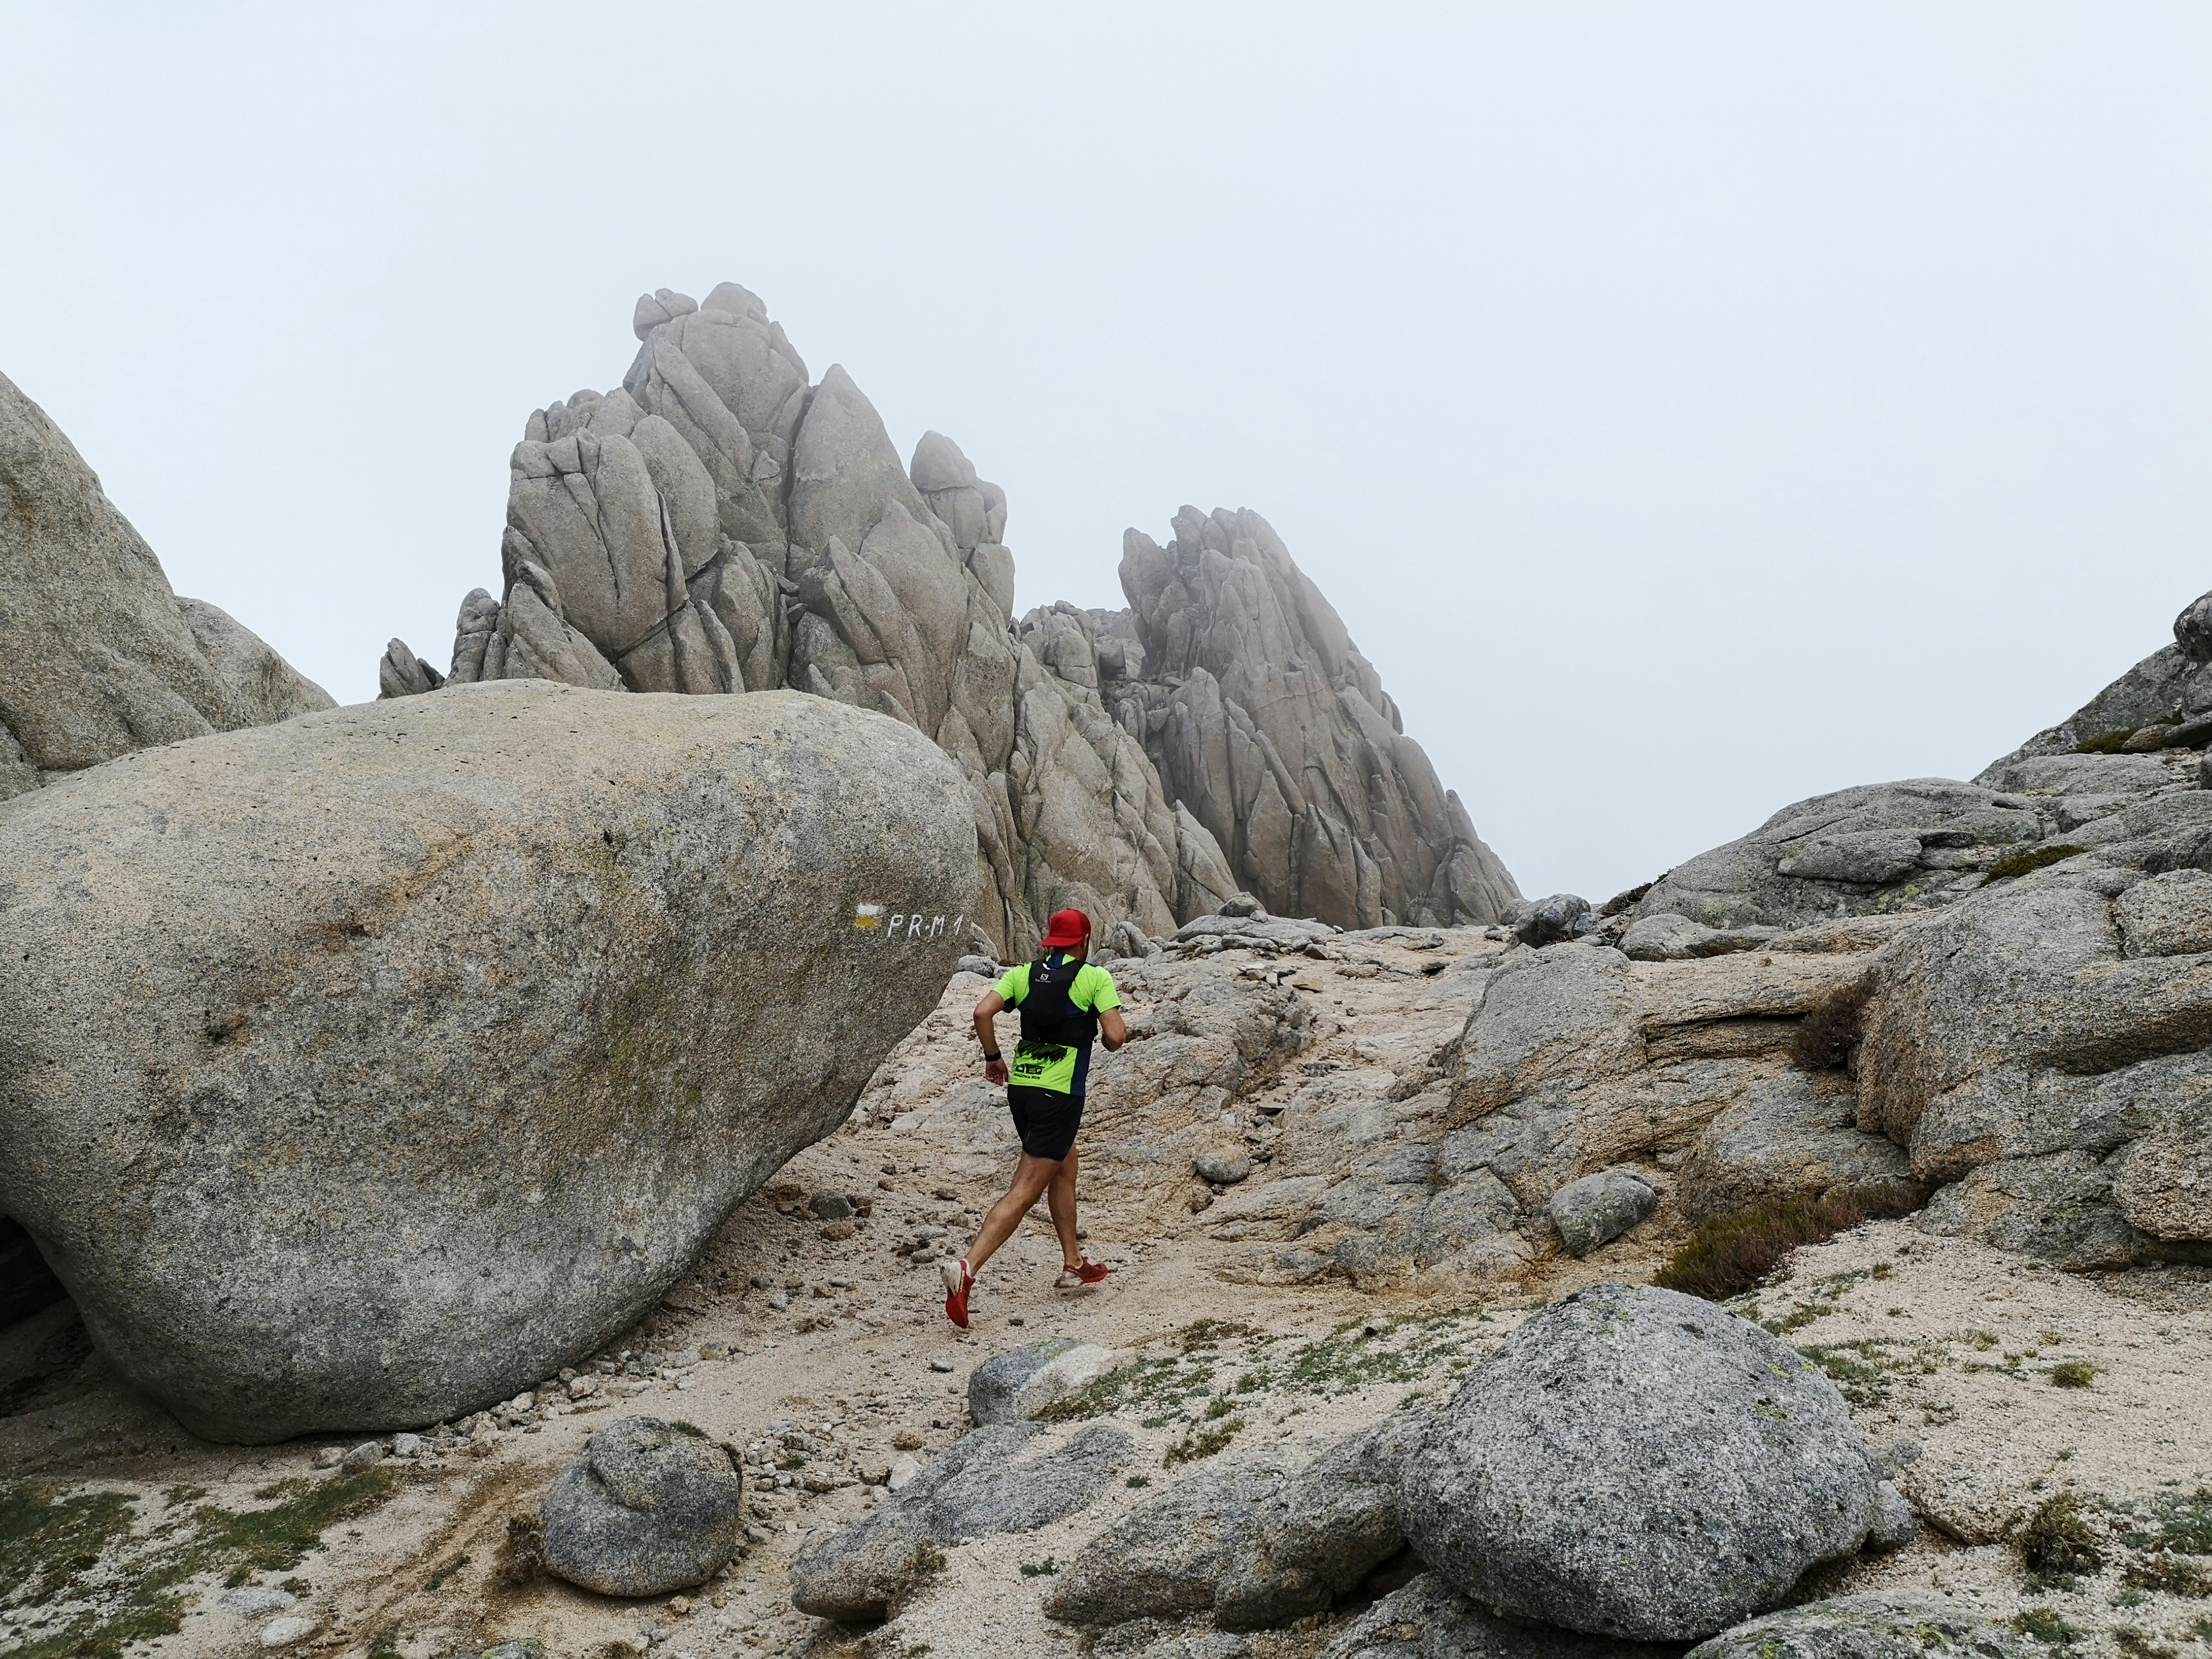 Trail running at Las Torres de la Pedriza on a foggy morning. La Pedriza is a geological feature on the southern slopes of the Guadarrama mountain range of great scenic and leisure interest. Access is from Manzanares el Real, a municipality in the northwest of the Community of Madrid (Spain).